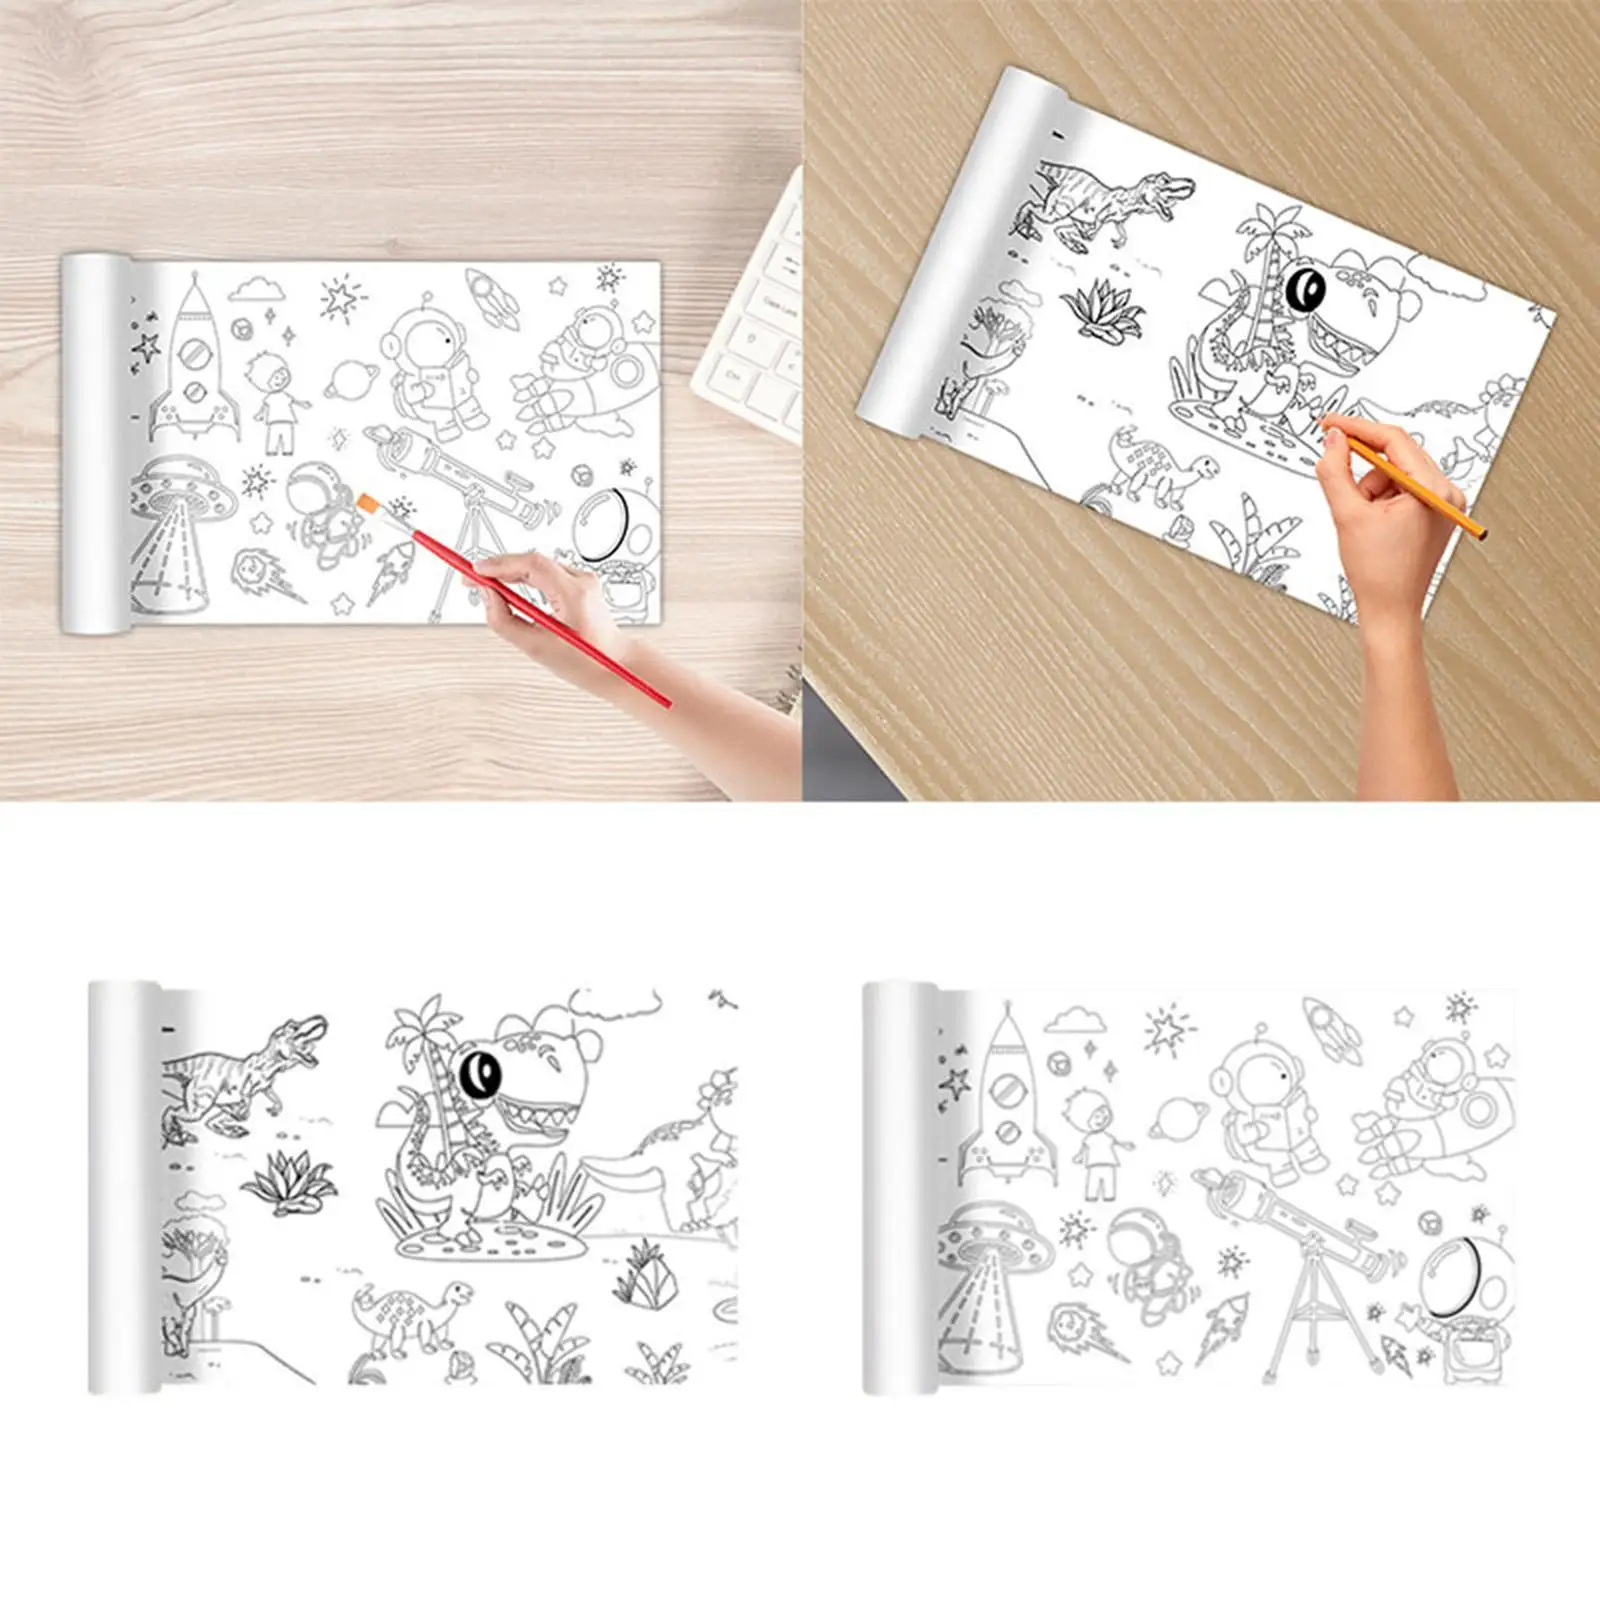 Coloring Poster Graffiti Paper Gifts Painting DIY Art Paper Roll Sticky for Marker Acrylic Paint Classroom Kids Birthday Party